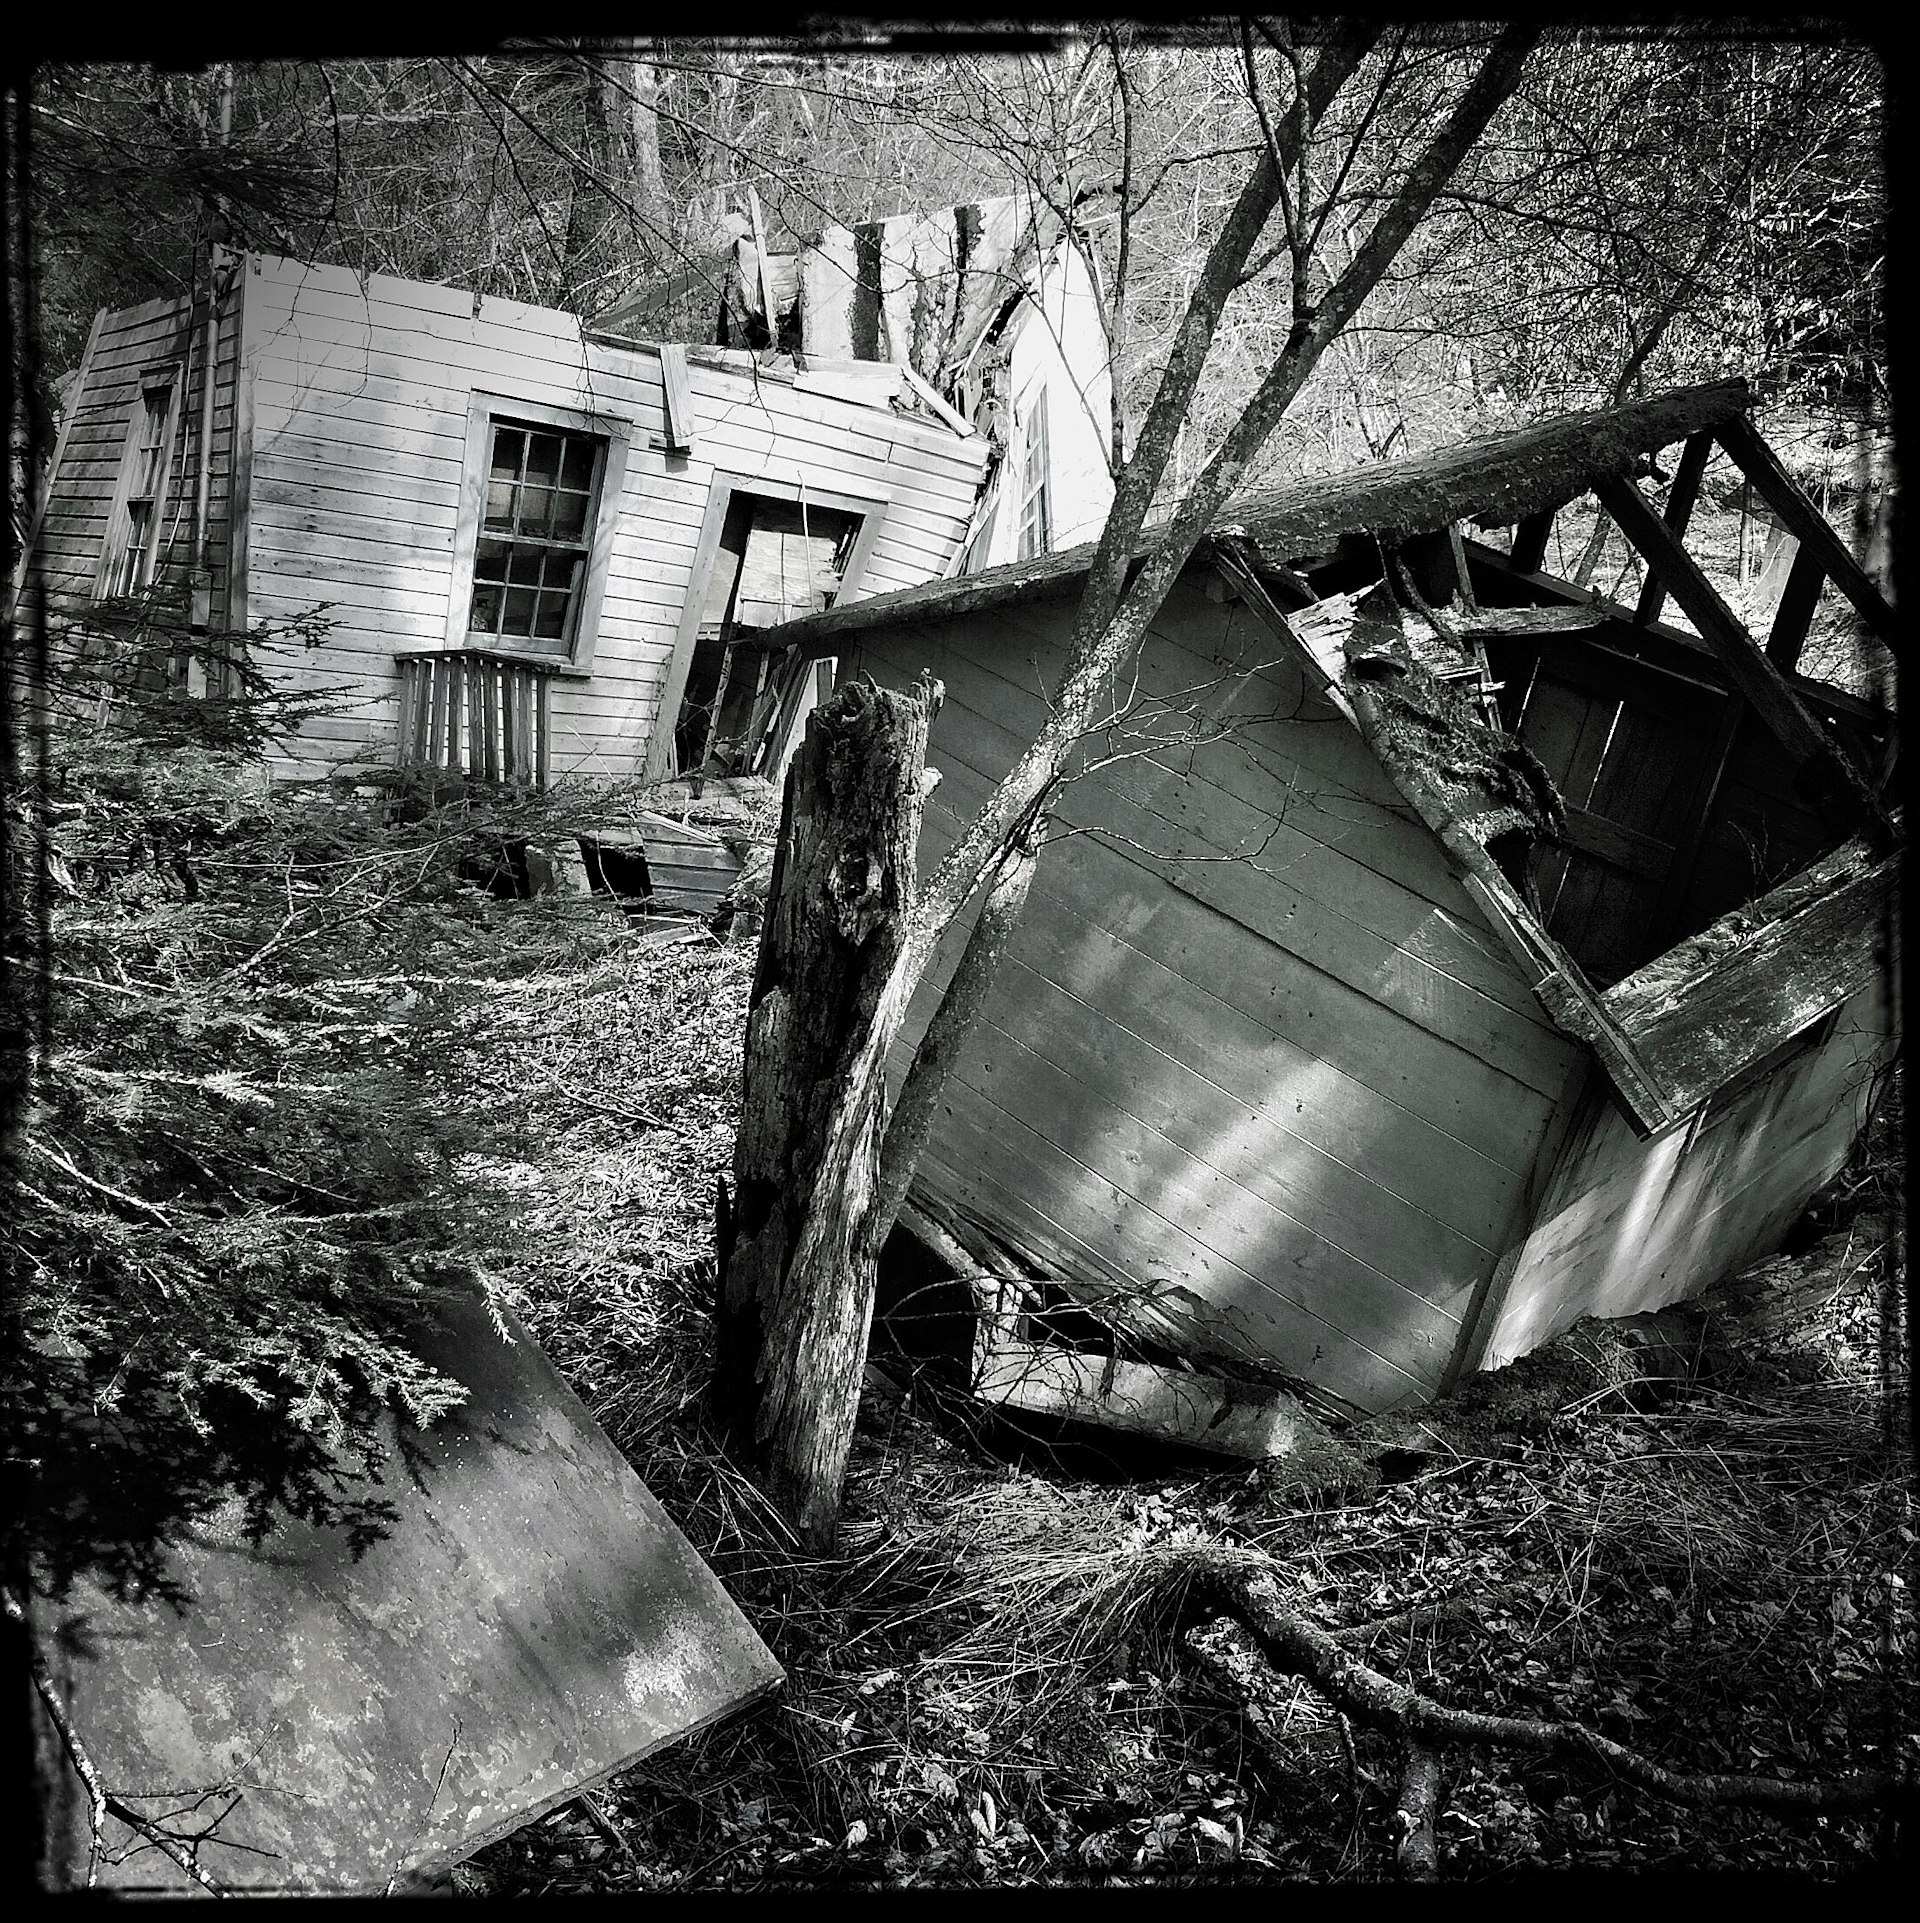 Two bungalows in Sullivan County, New York are collapsing in this black and white photo of a former resort town in the Catskills. Neither building has a complete roof any more, and both are listing to the side like rotting Halloween pumpkins. All around them, trees and undergrowth and taking over.